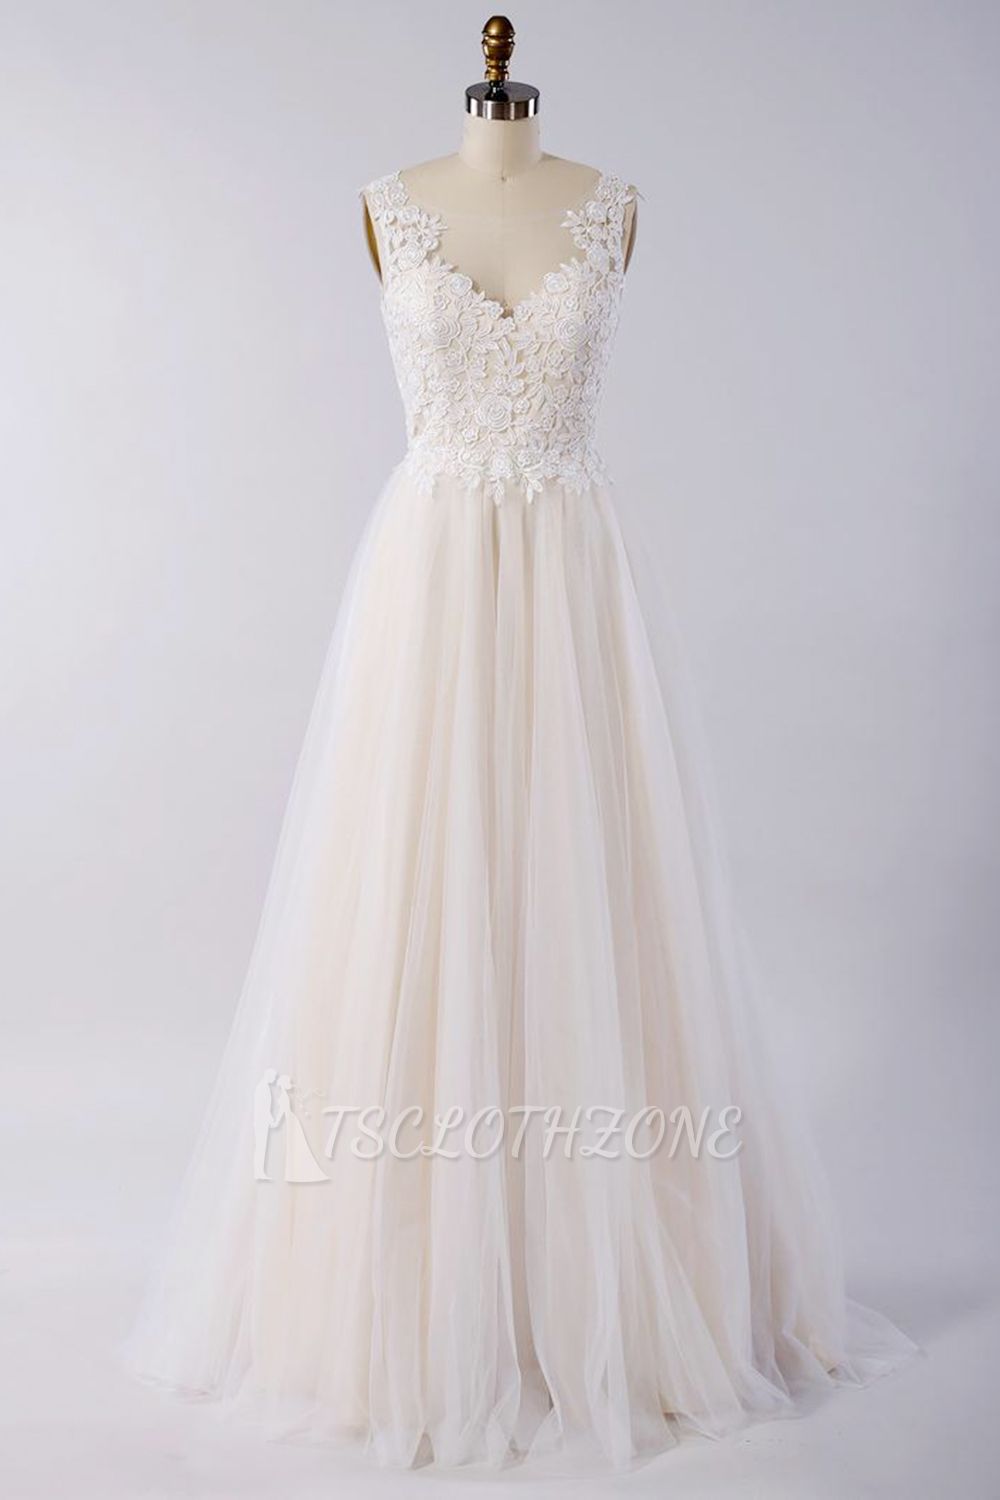 Stylish V-neck Straps Tulle Wedding Dress | Appliques A-line Ruffles Bridal Gowns